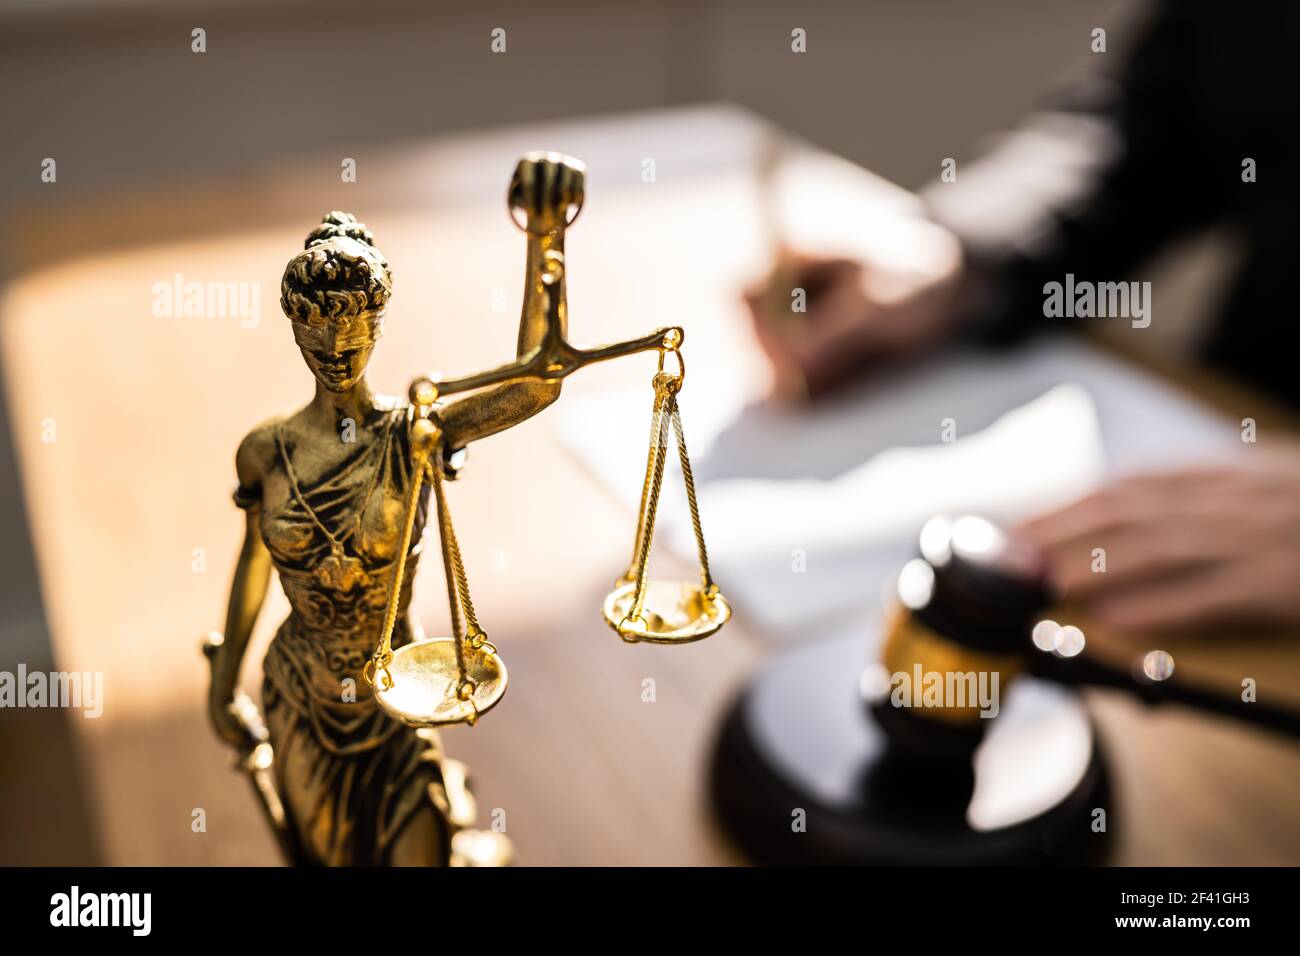 Judge With Gavel In Court Writing Legal Law Order Stock Photo